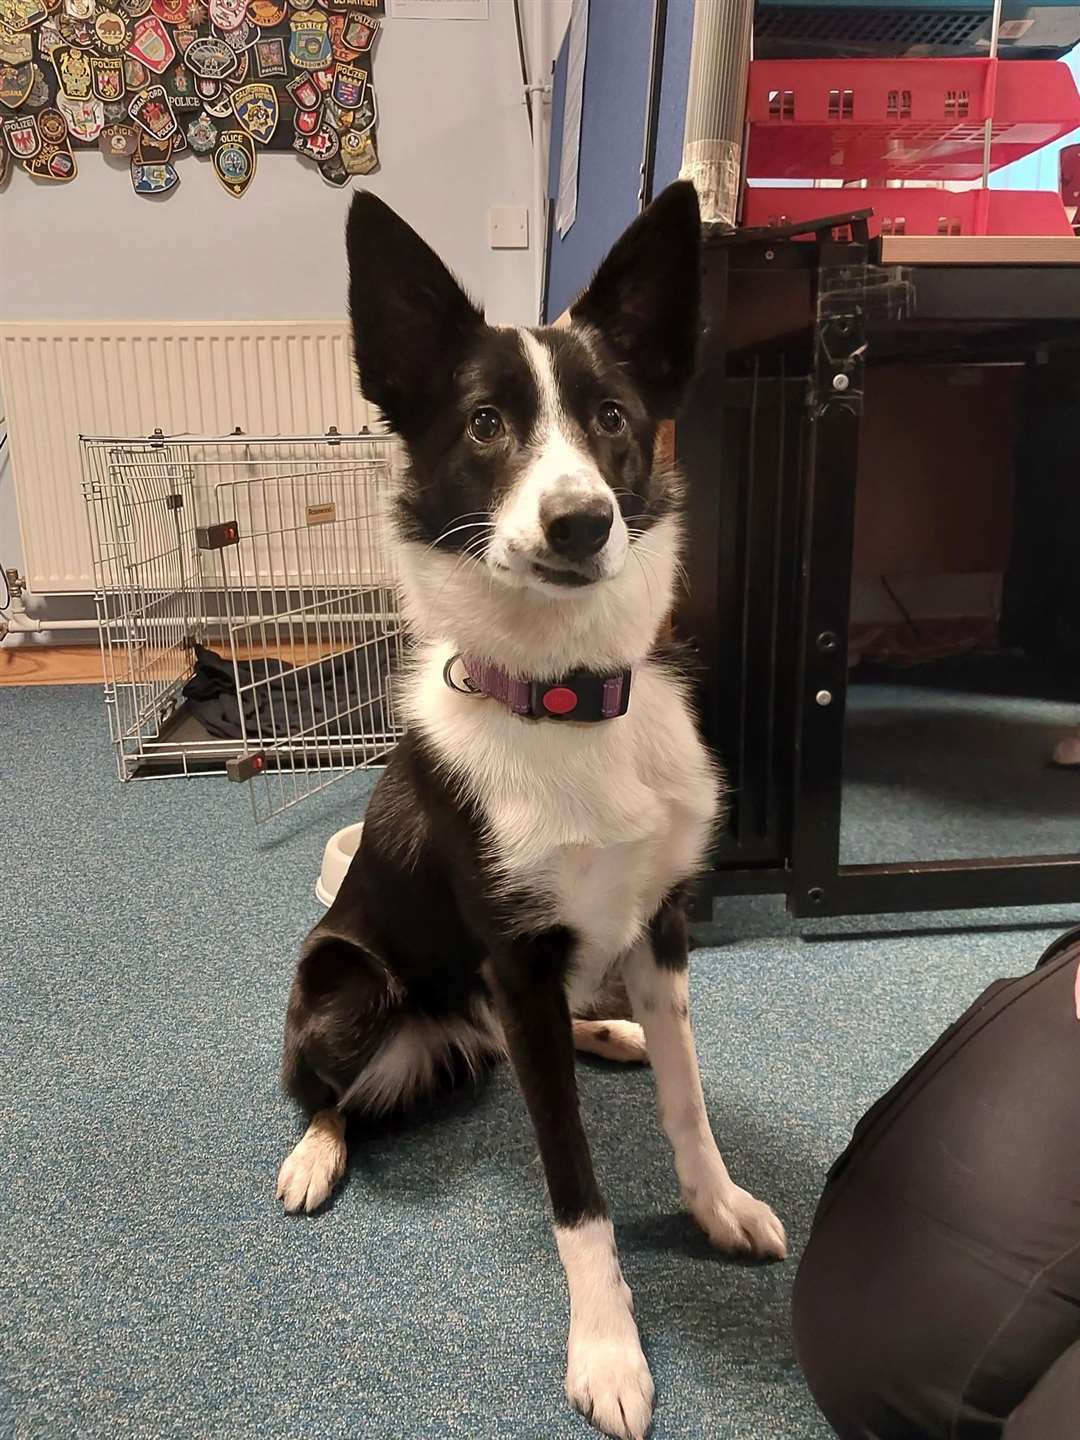 The female collie pup found in Inverness.